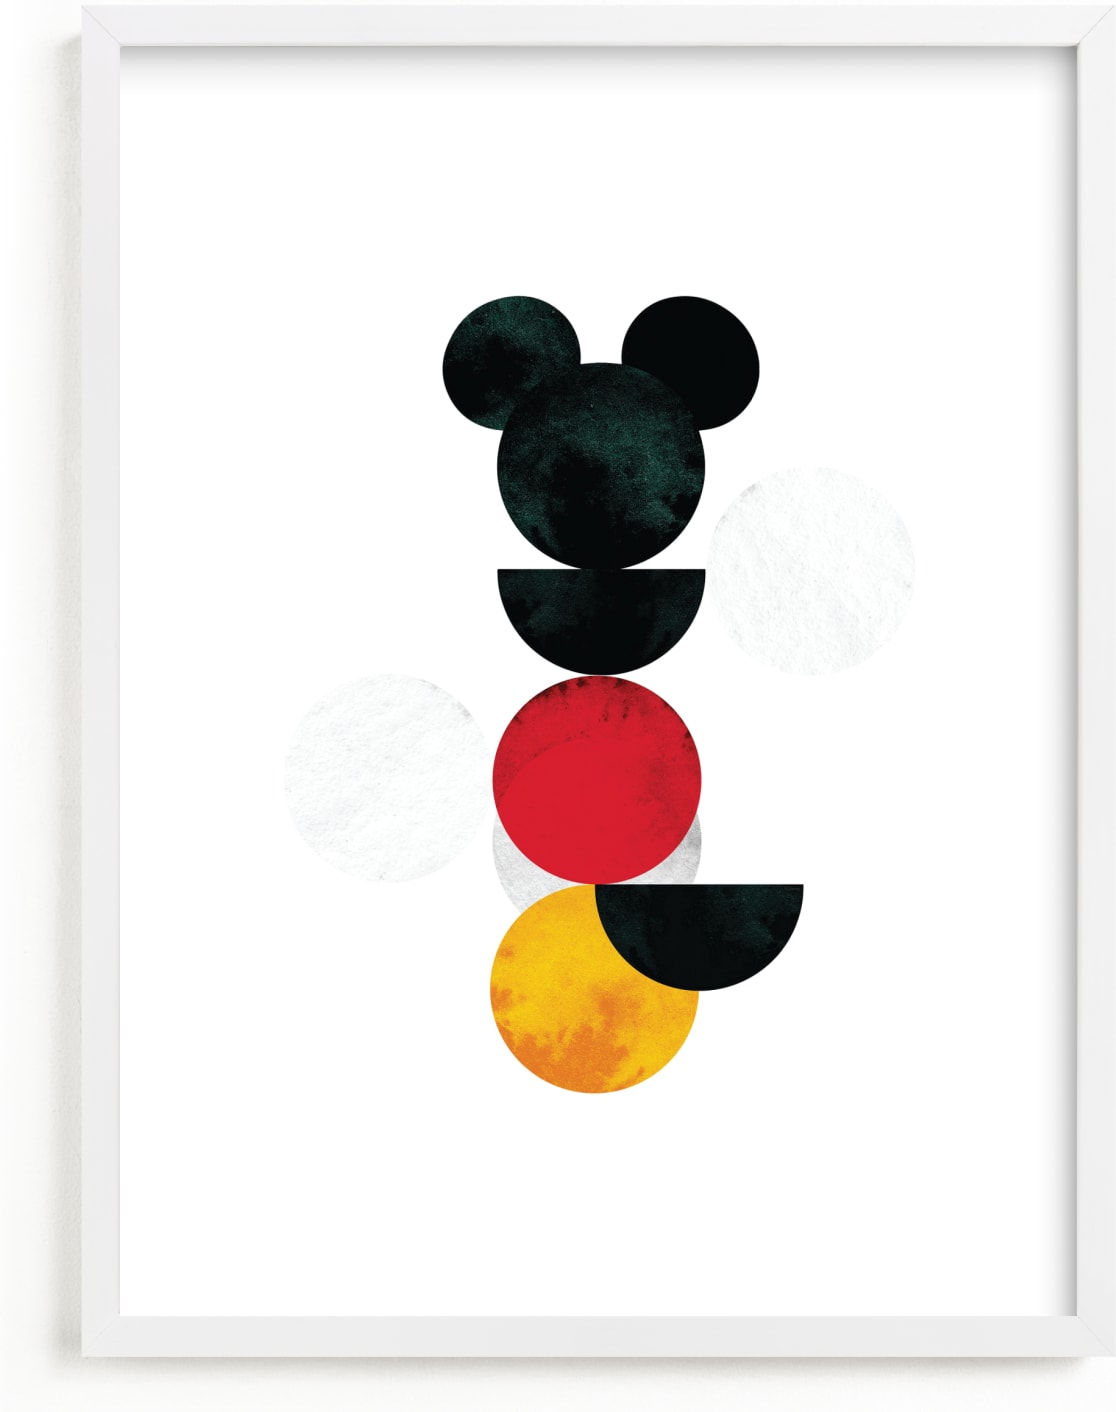 This is a yellow, black, red disney art by Anna Joseph called Minimalist.